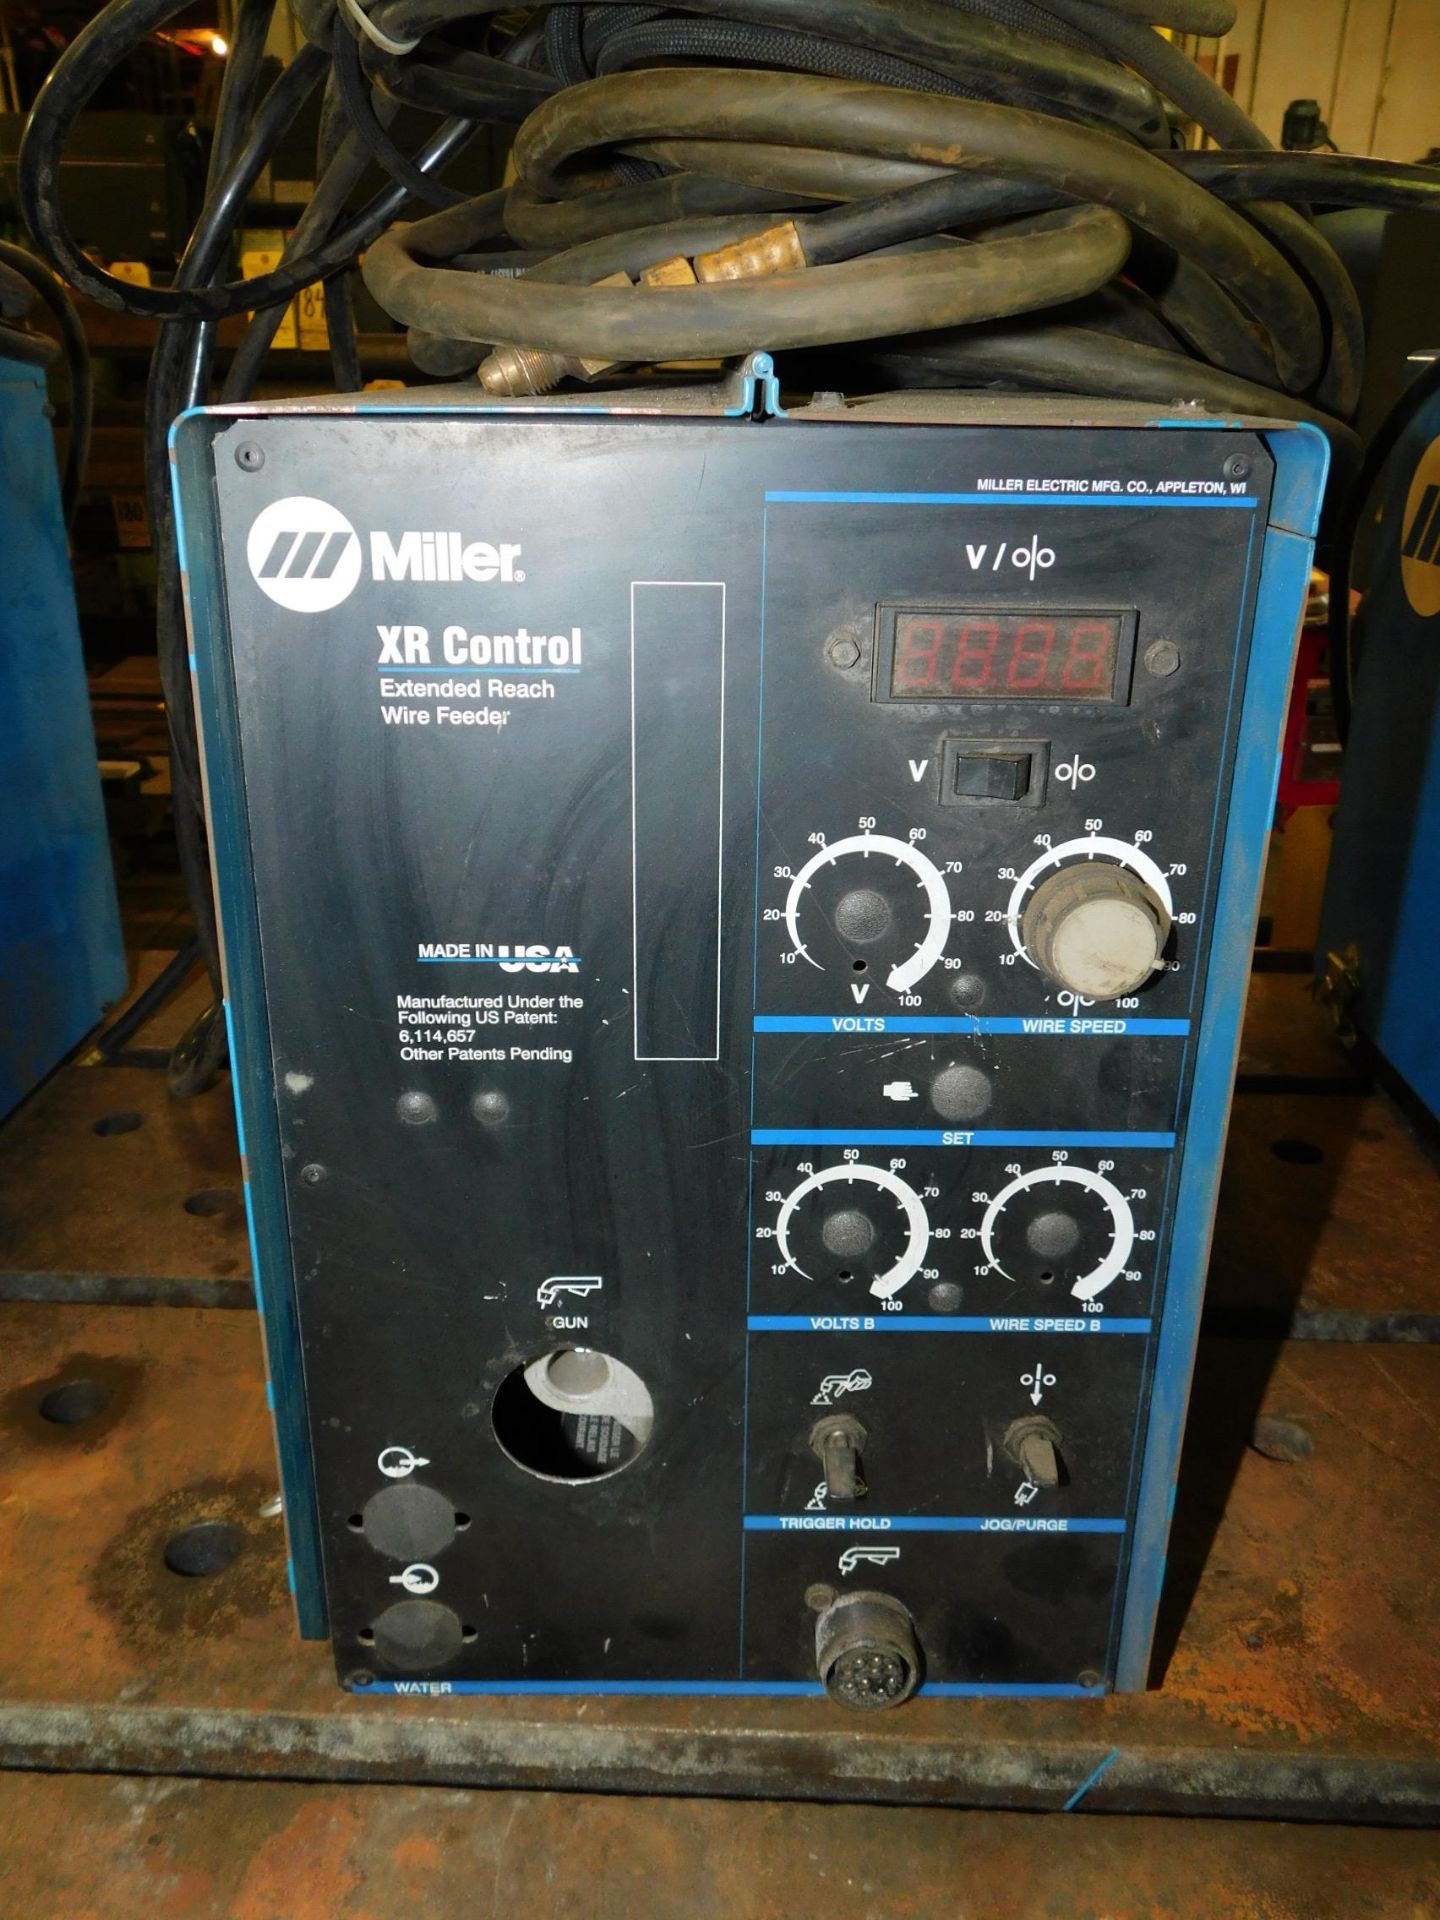 Miller XR Control Extended Reach Wire Feeder, s/n LF097582, 24 Volt - Image 2 of 4